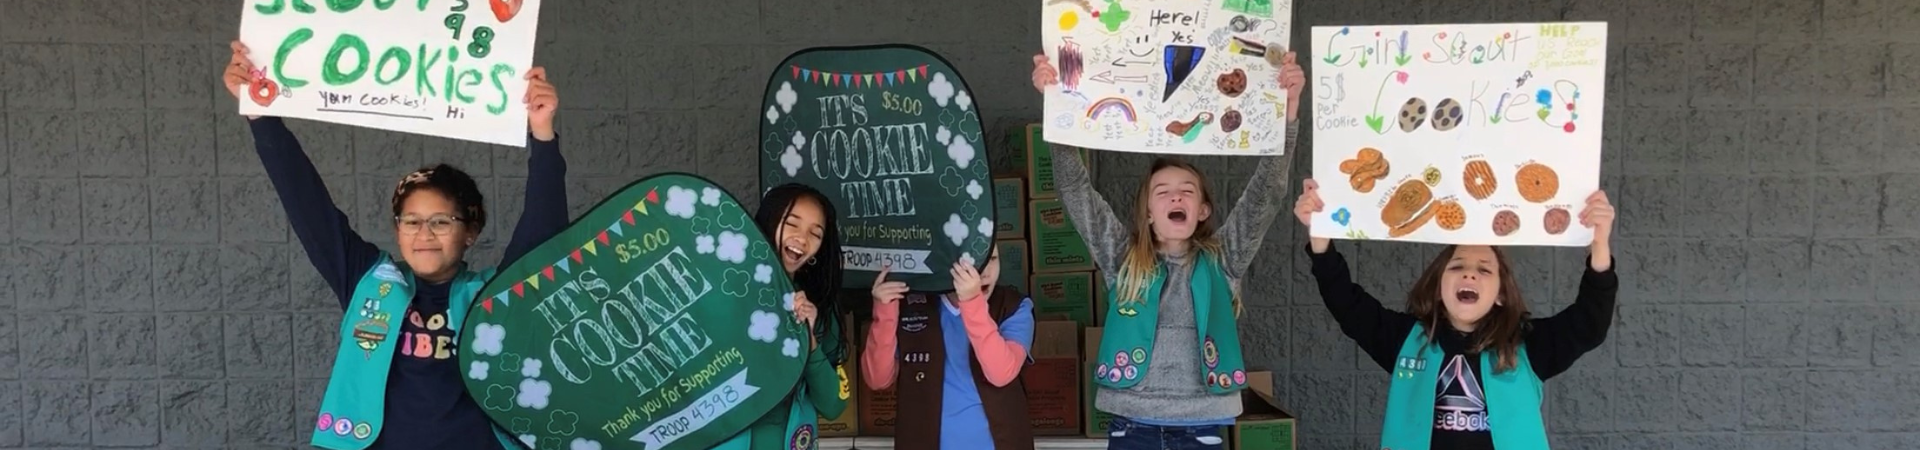  Five girls hold up cookie signs at an outdoor cookie booth 